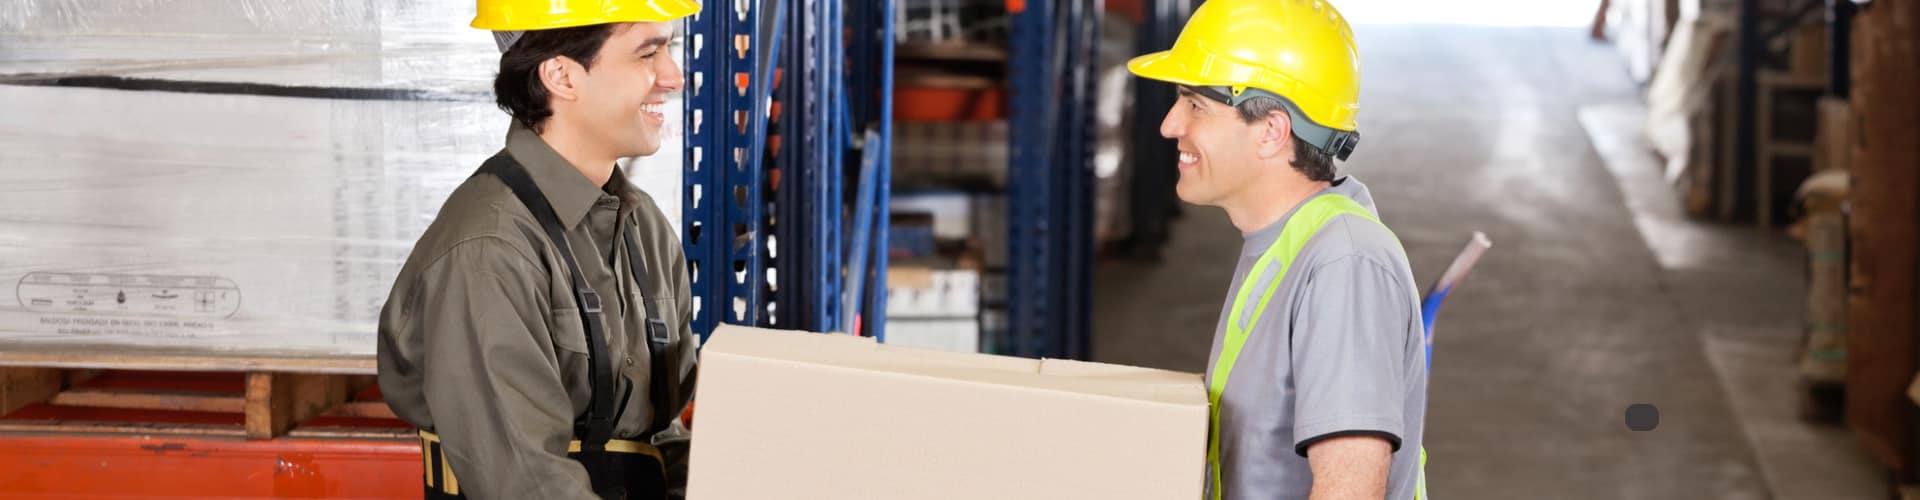 Managing Health & Safety Risks in the Workplace